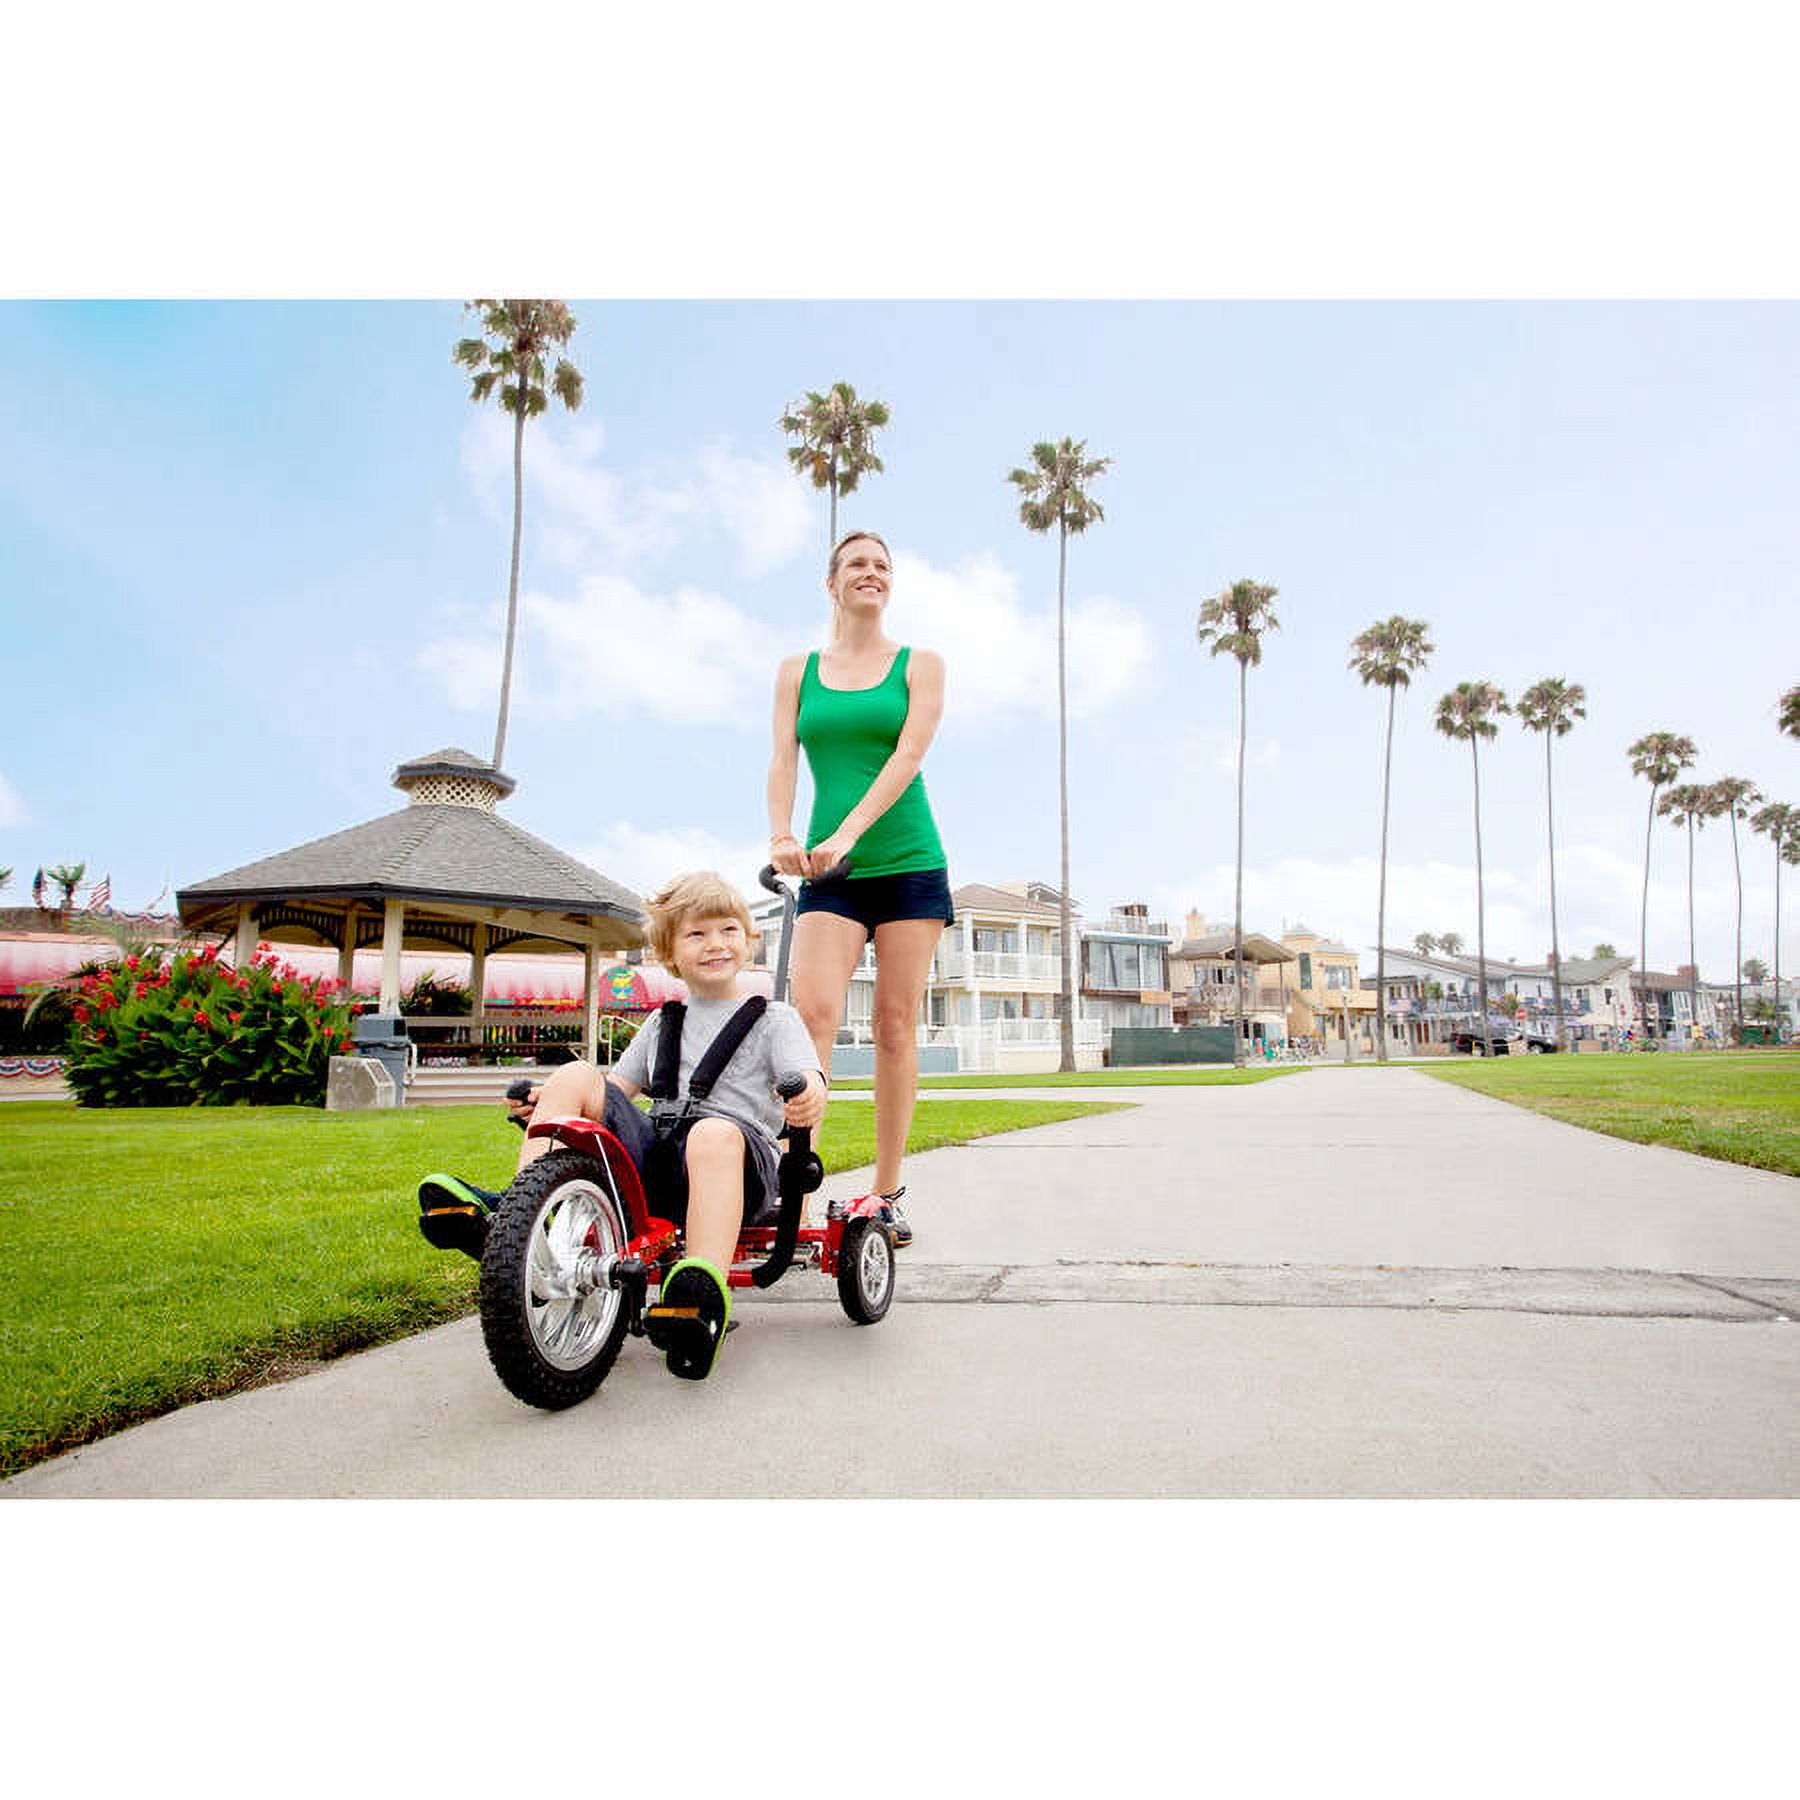 Mobo Mega Mini: The Roll-to-Ride 3-Wheeled Cruiser Tricycle, Push & Pedal Ride On Toy, Red - image 4 of 6